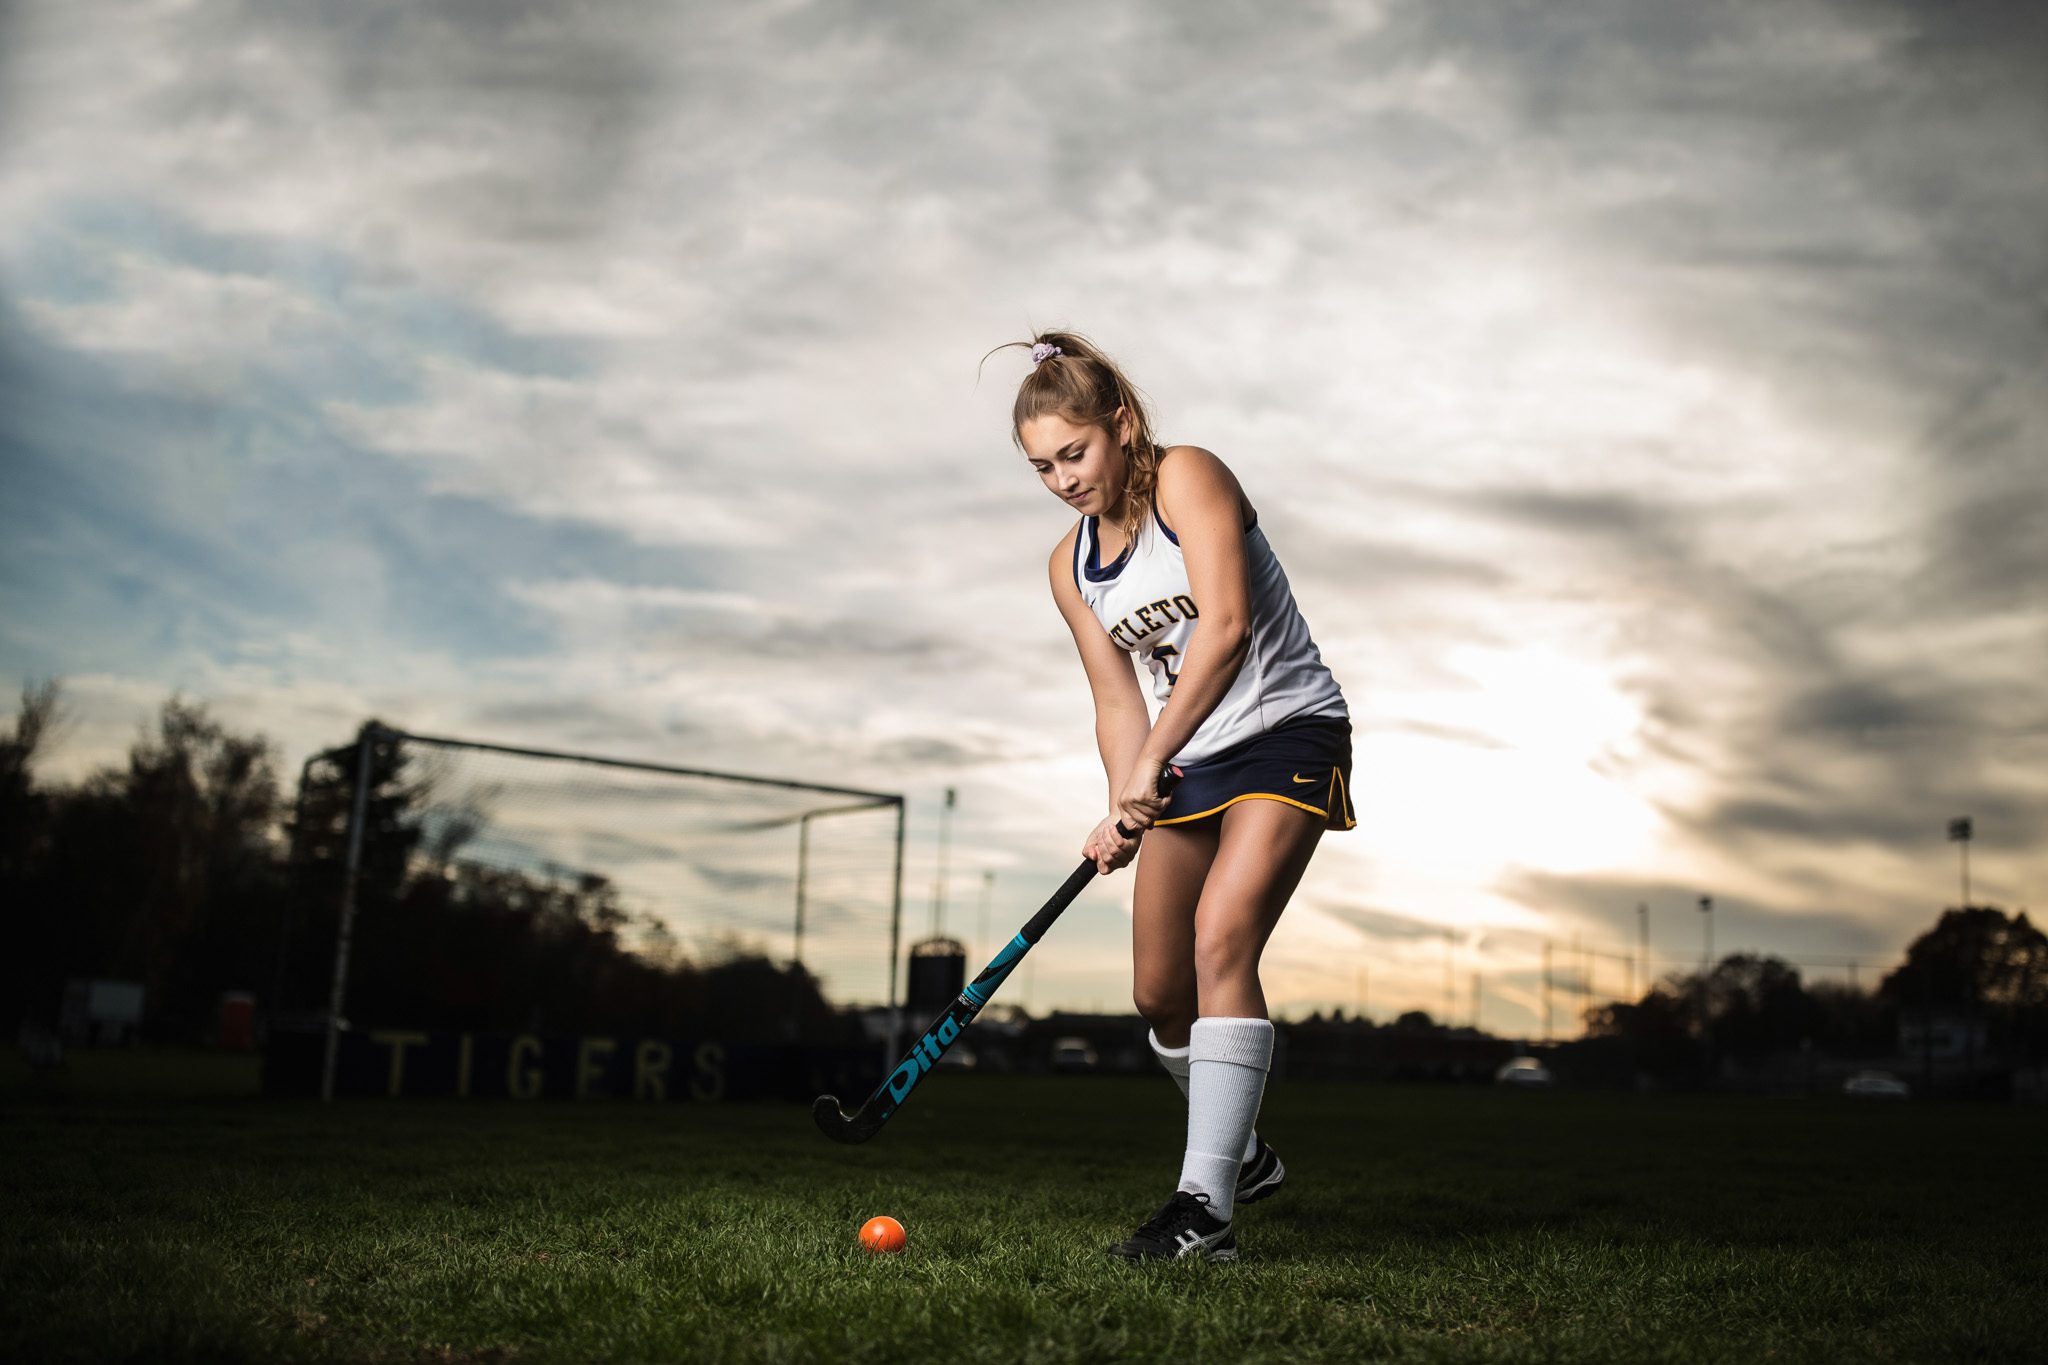 Senior portrait of a young woman playing field hockey at her high school at dusk in Massachusetts photographed by Sean Wytrwal of J&S Photography